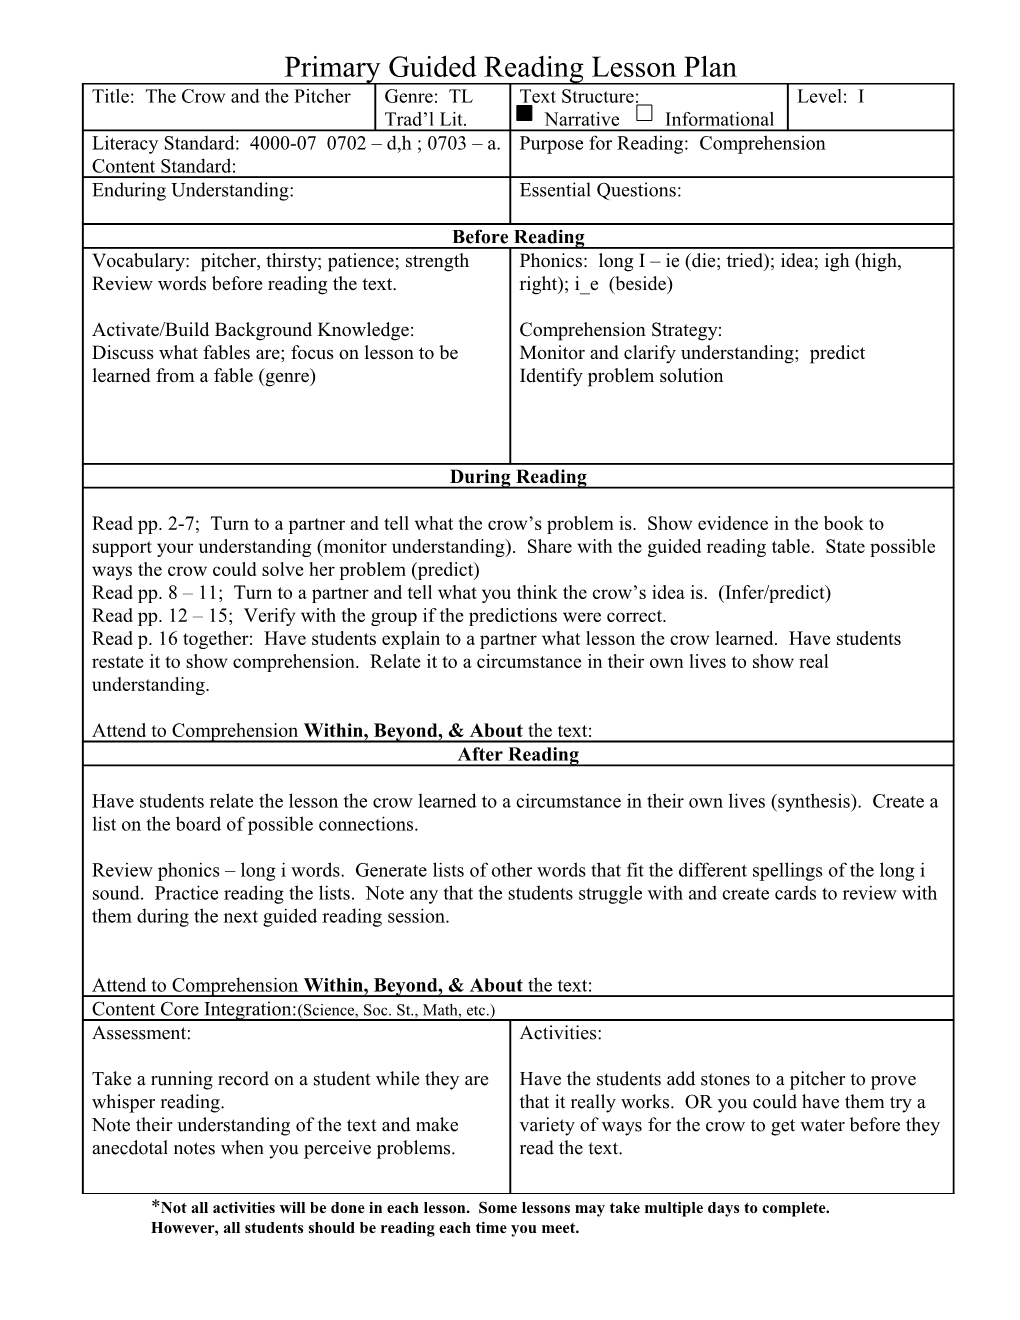 Primary Guided Reading Lesson Plan s2